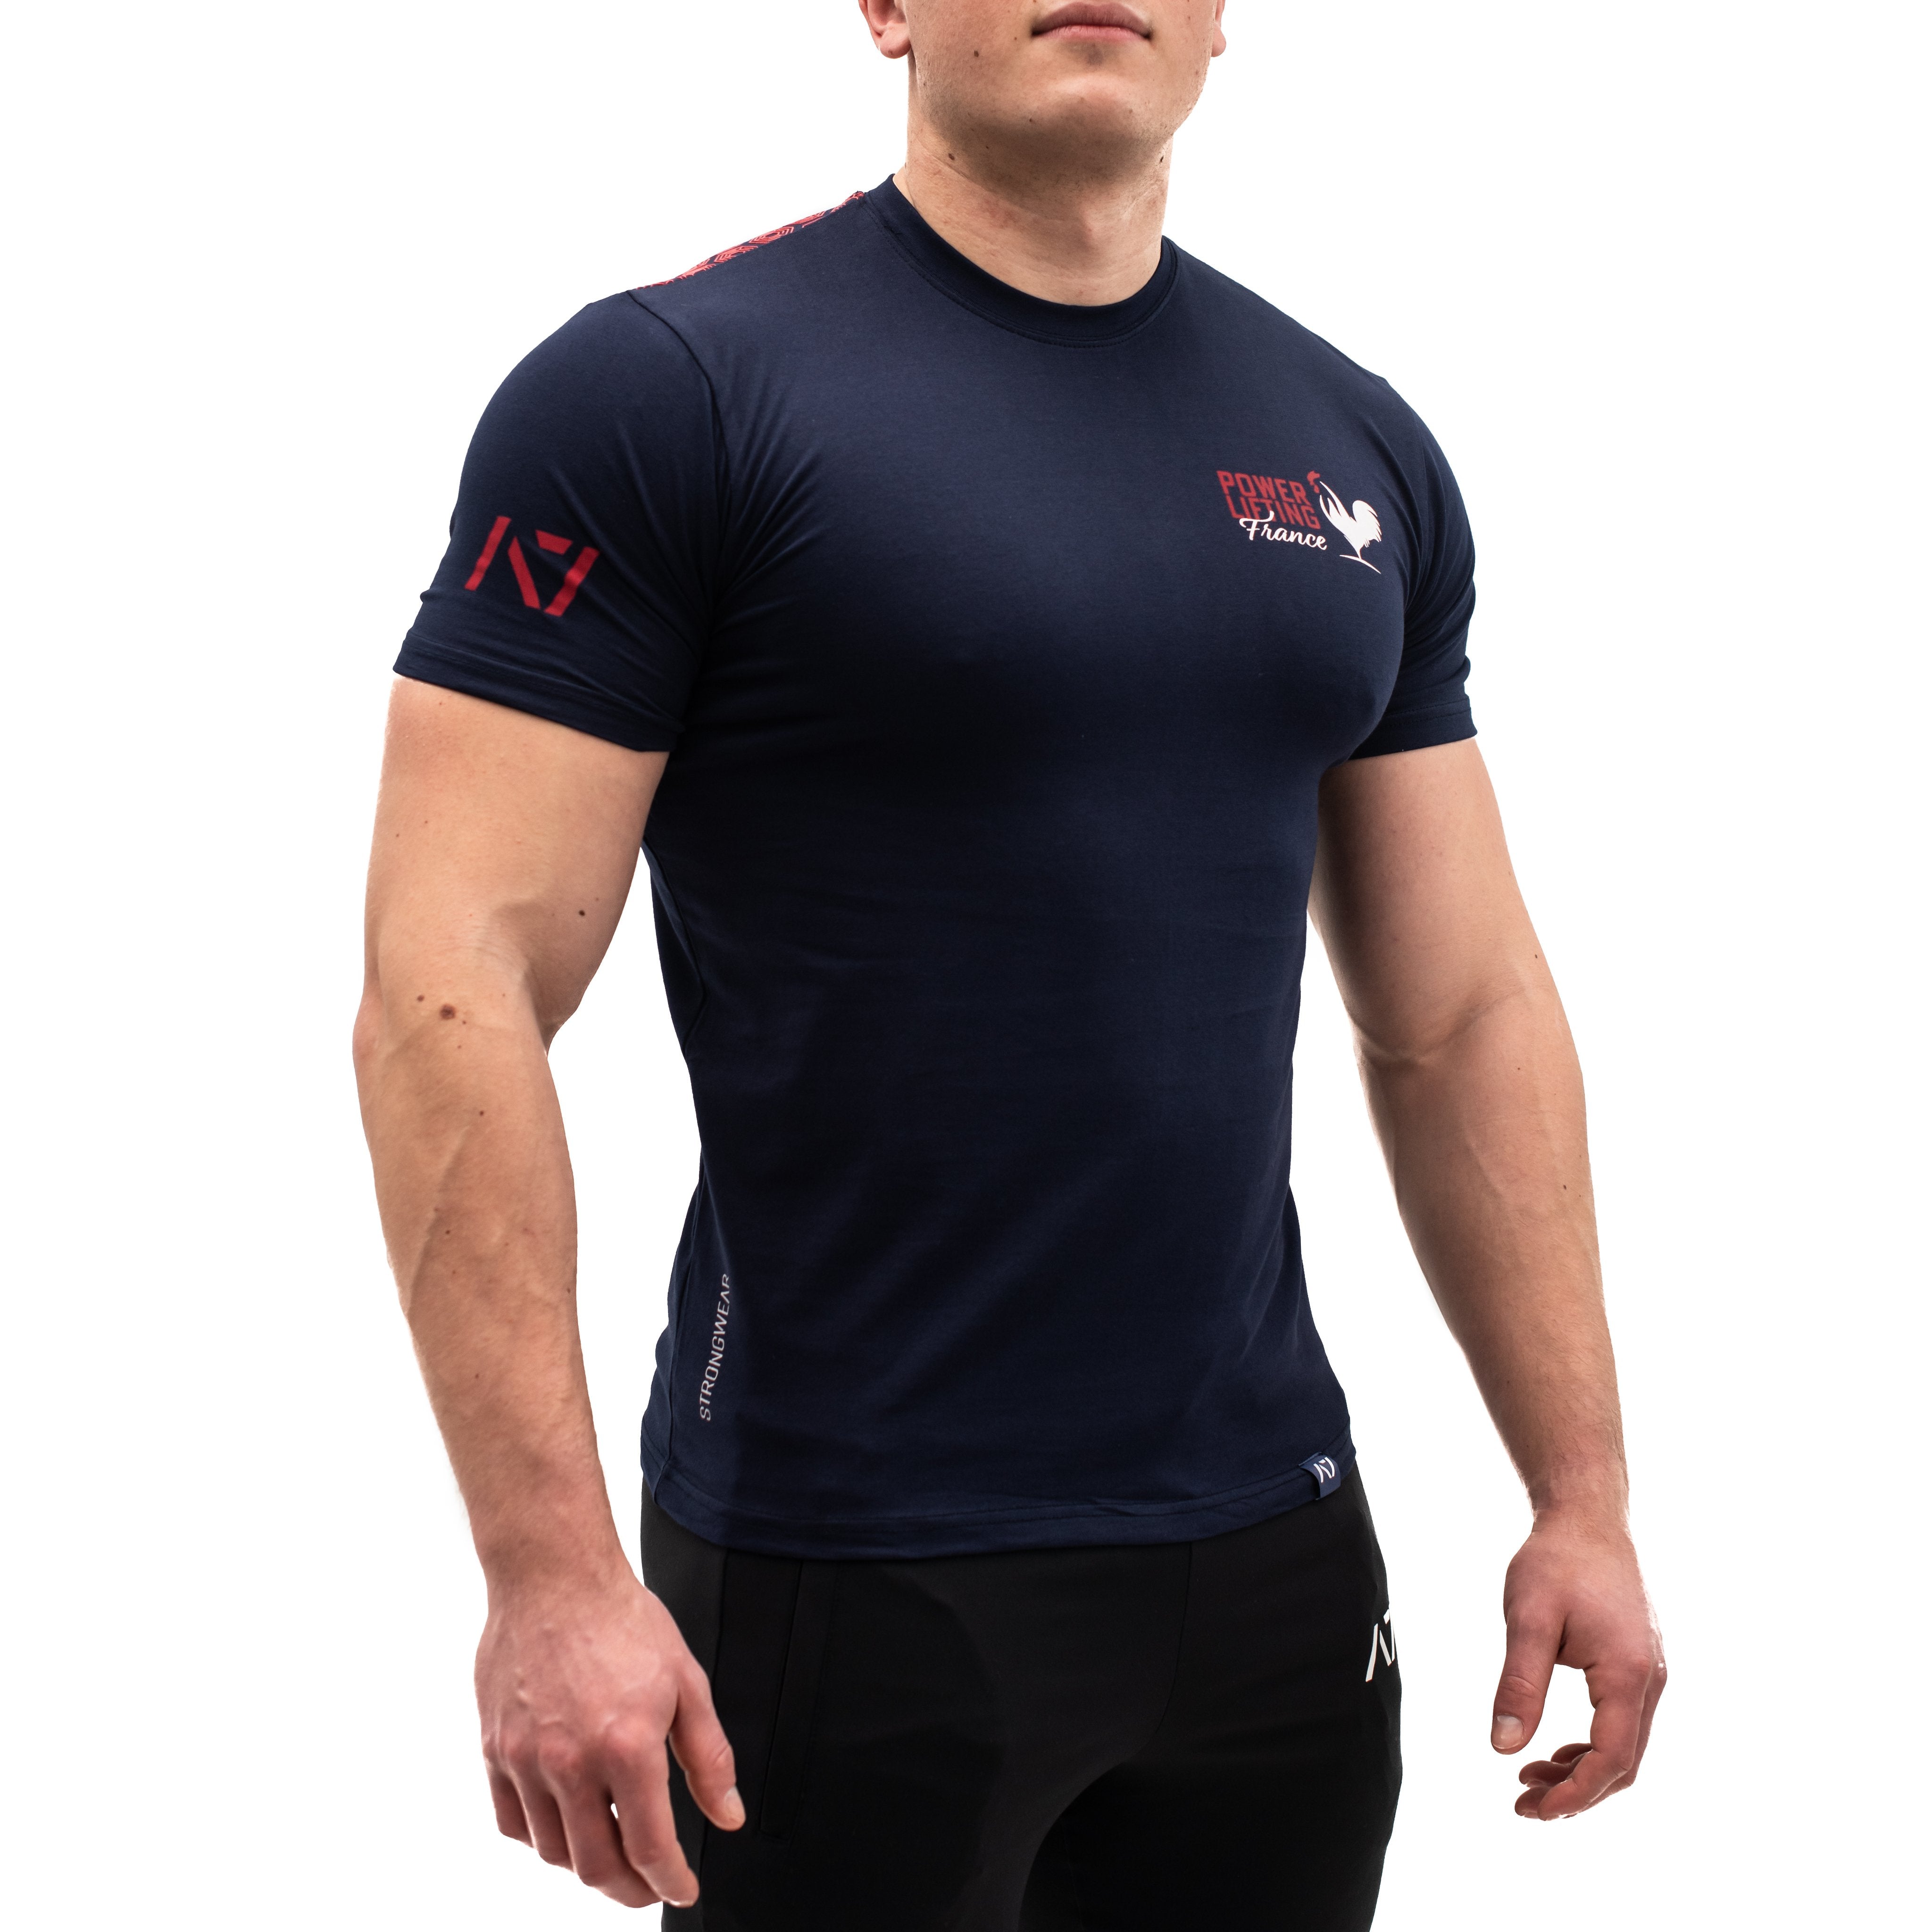 Powerlifting France Bar Grip T-shirt, great as a squat shirt. Purchase Powerlifting France Bar Grip tshirt UK from A7 UK. Purchase Powerlifting France Bar Grip Shirt in Europe from A7 UK. No more chalk and no more sliding. Best Bar Grip Tshirts, shipping to UK and Europe from A7 UK. Powerlifting France is our classic black on black shirt design! The best Powerlifting apparel for all your workouts. Available in UK and Europe including France, Italy, Germany, Sweden and Poland